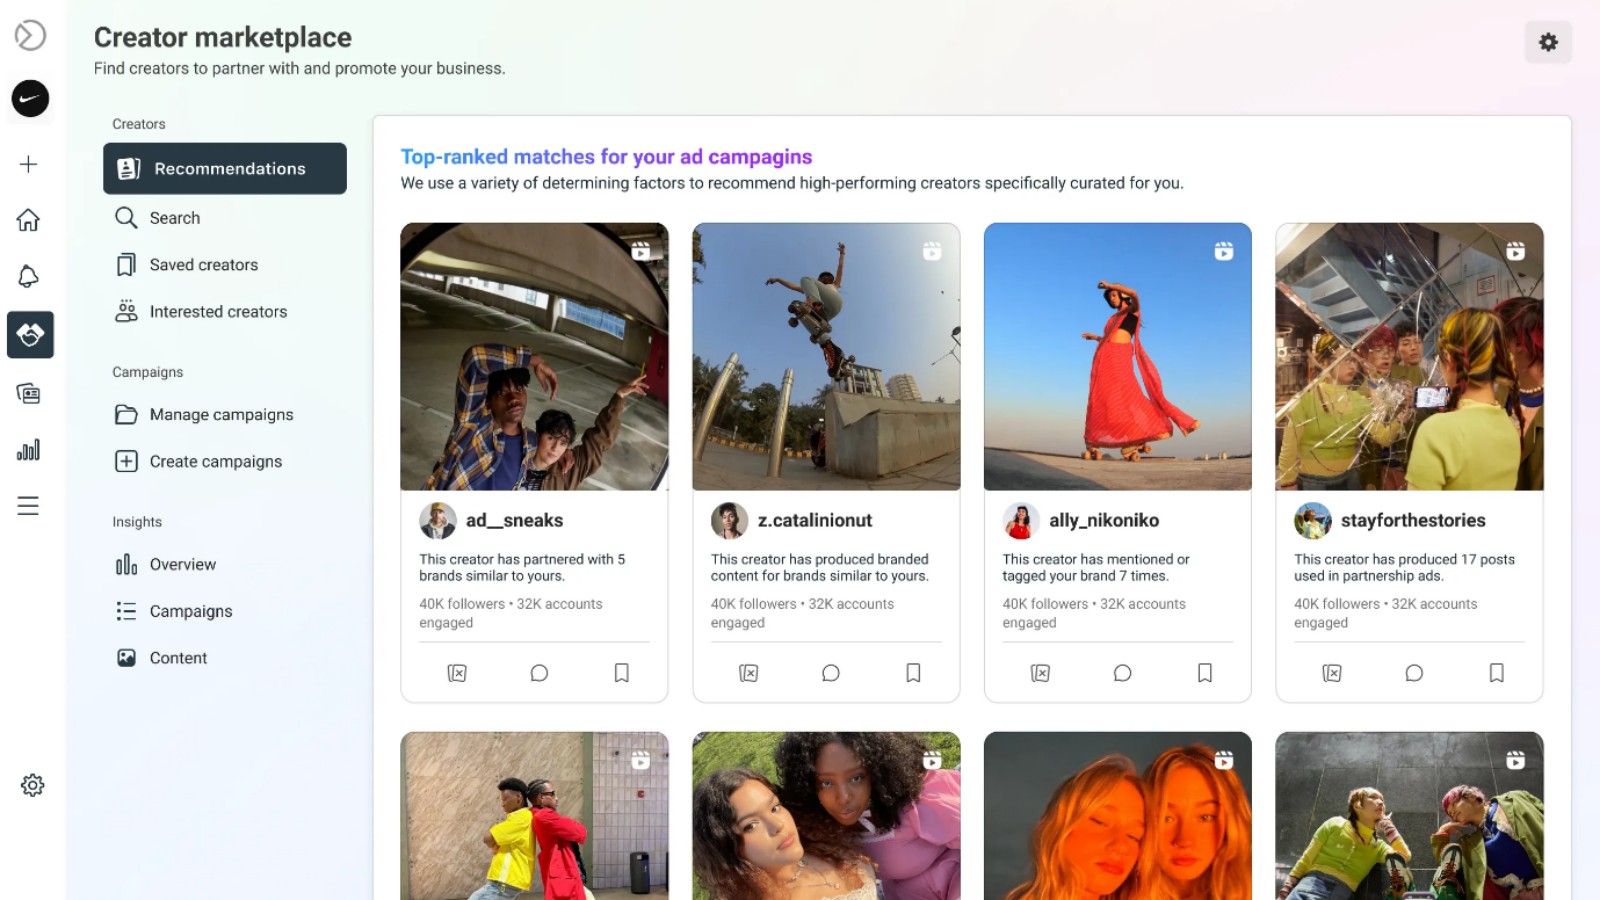 Instagram launches marketplace in 8 new countries